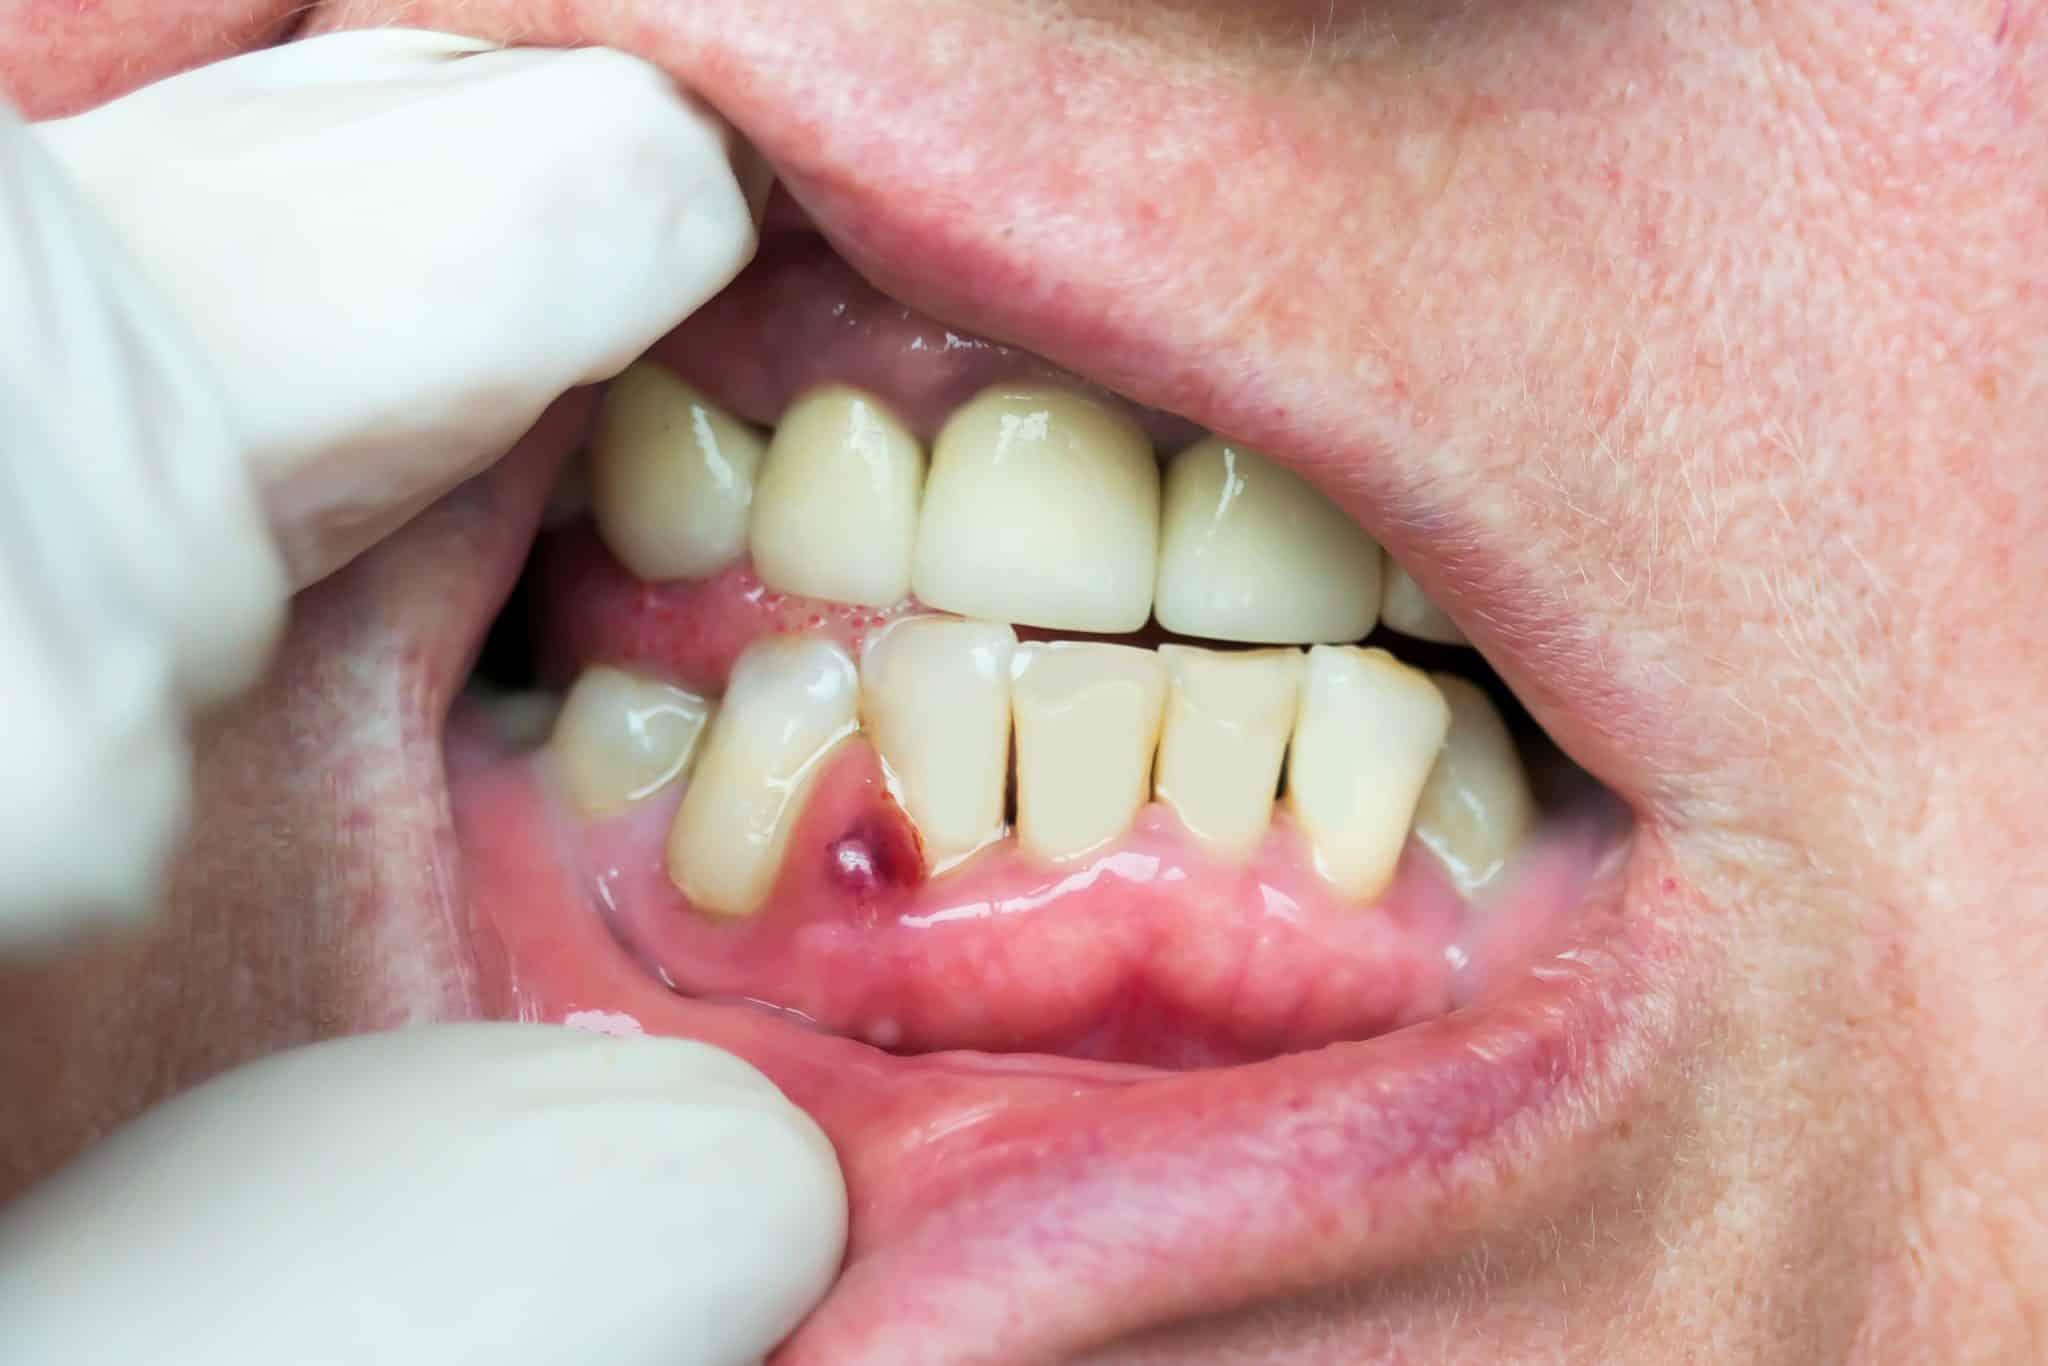 A photo of a man's mouth with a gum abscess